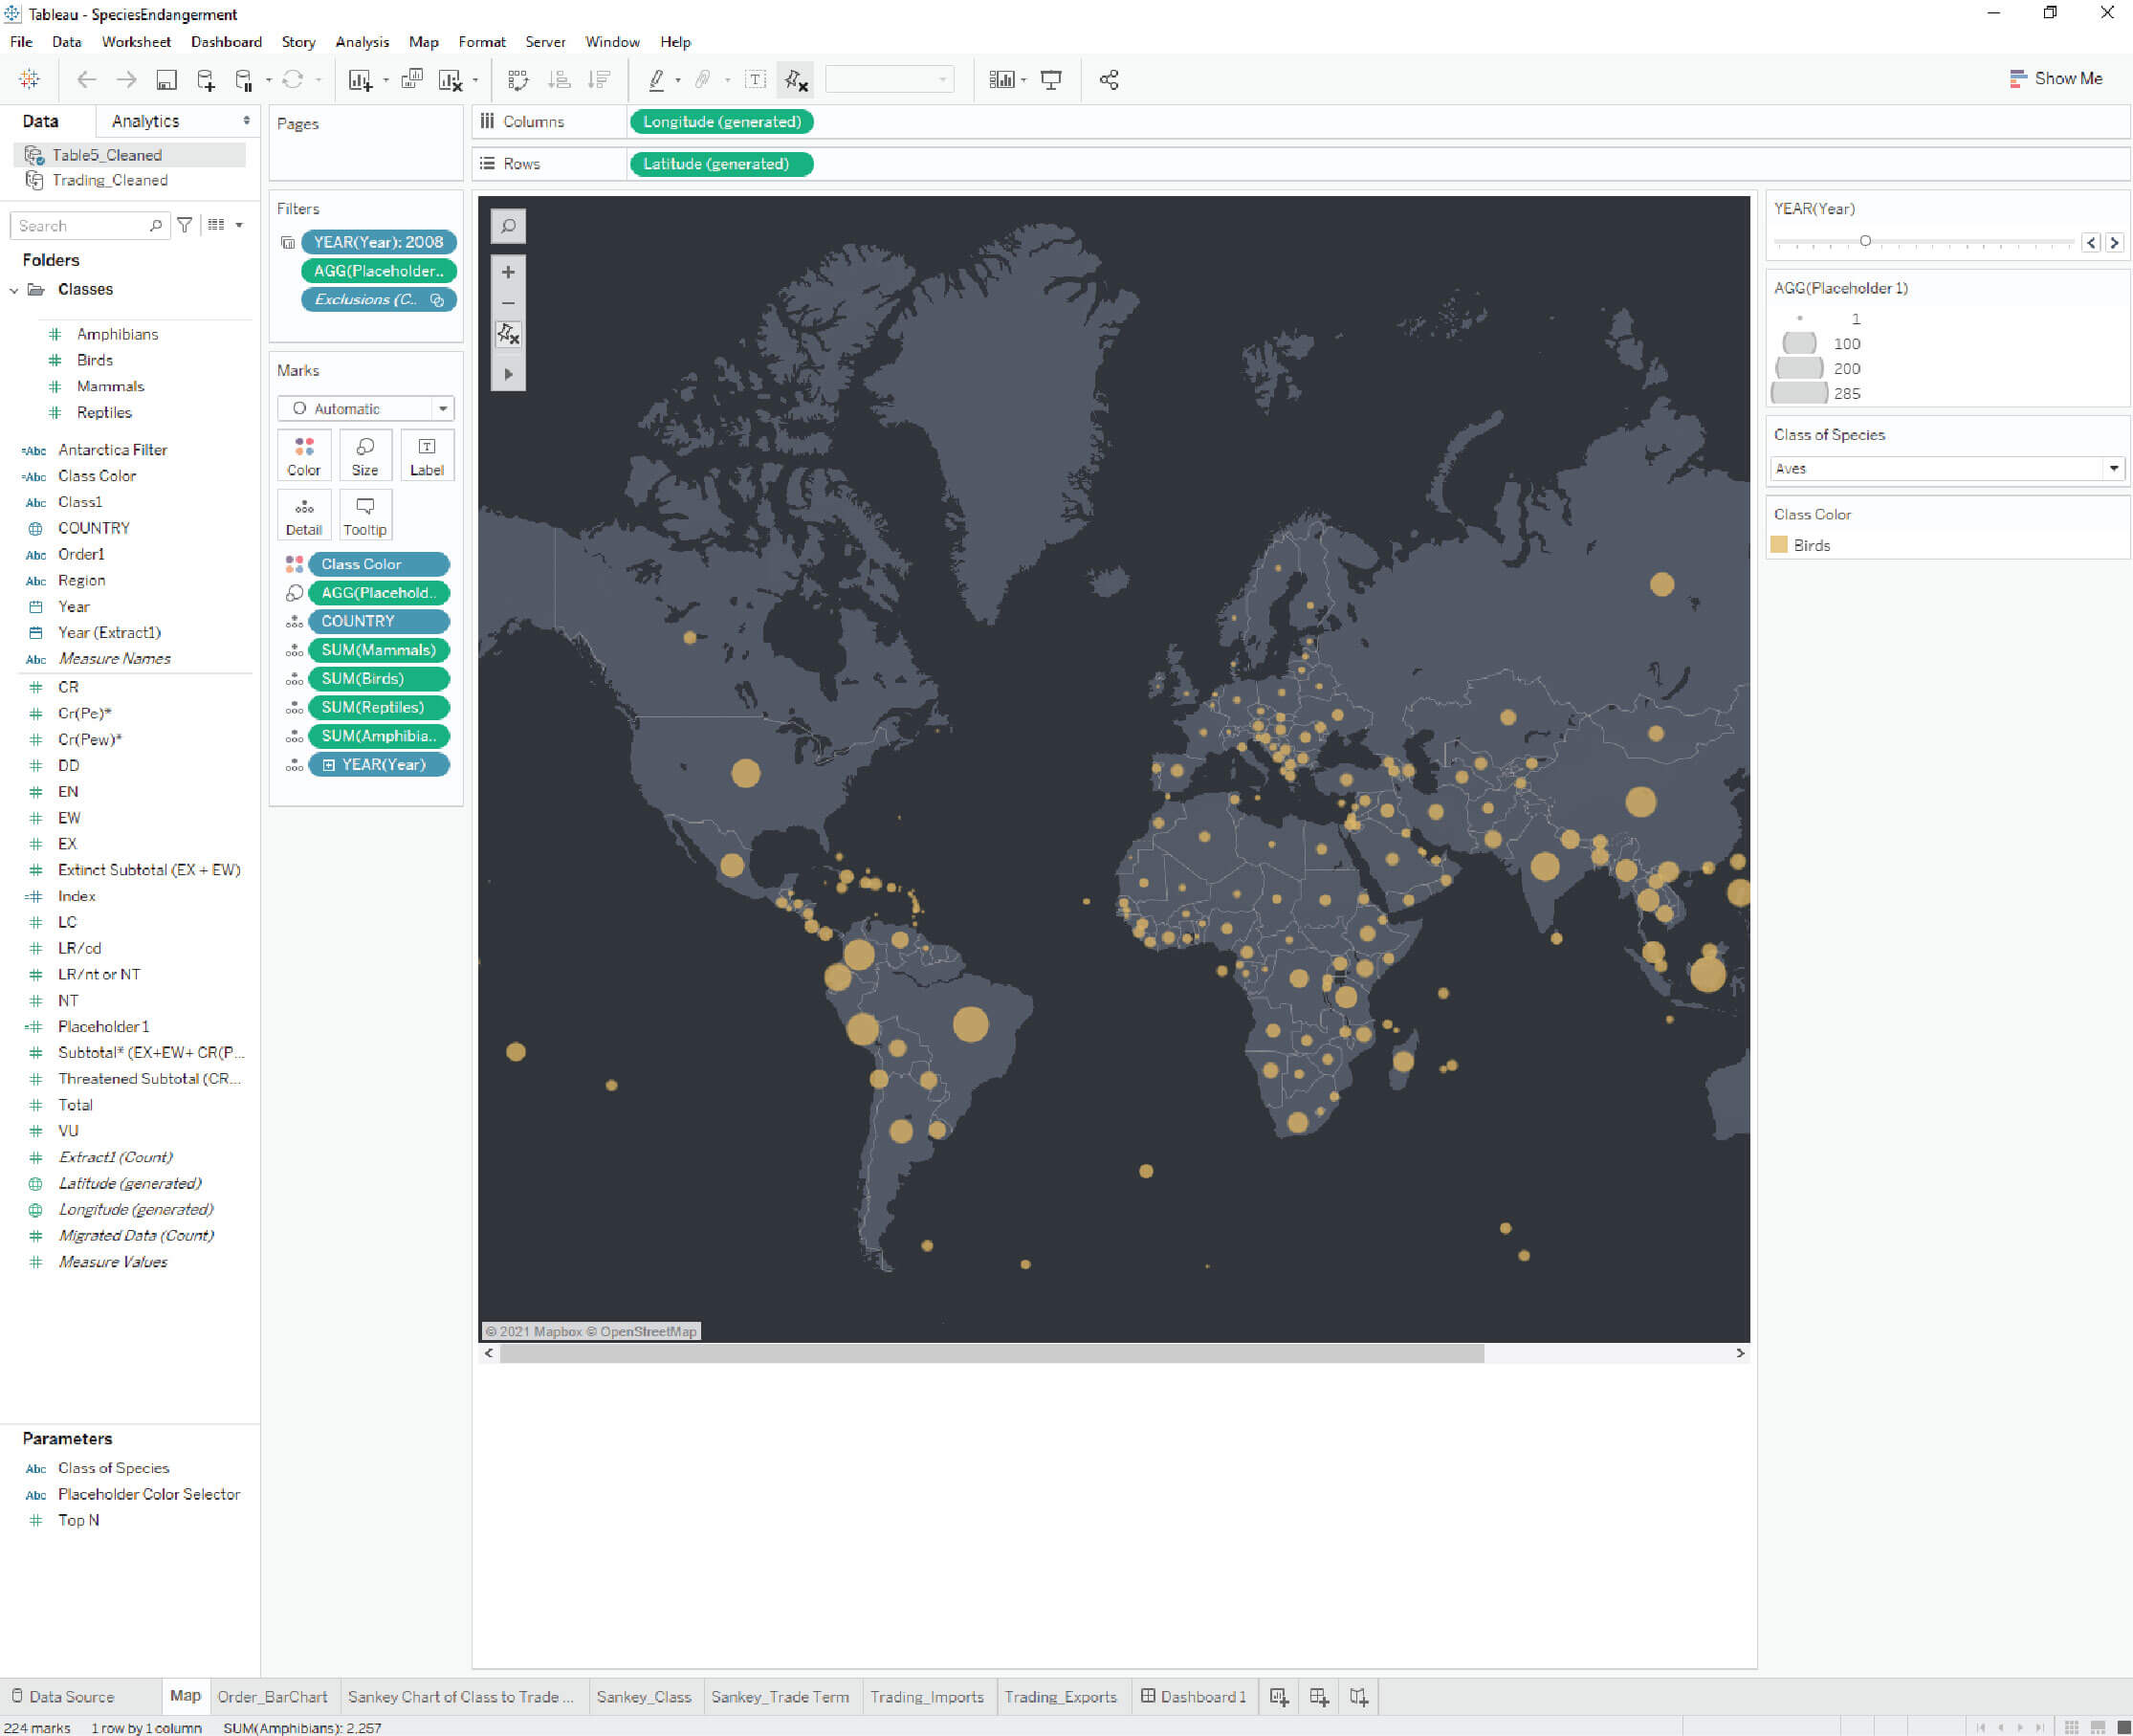 Integration of map data into Tableau